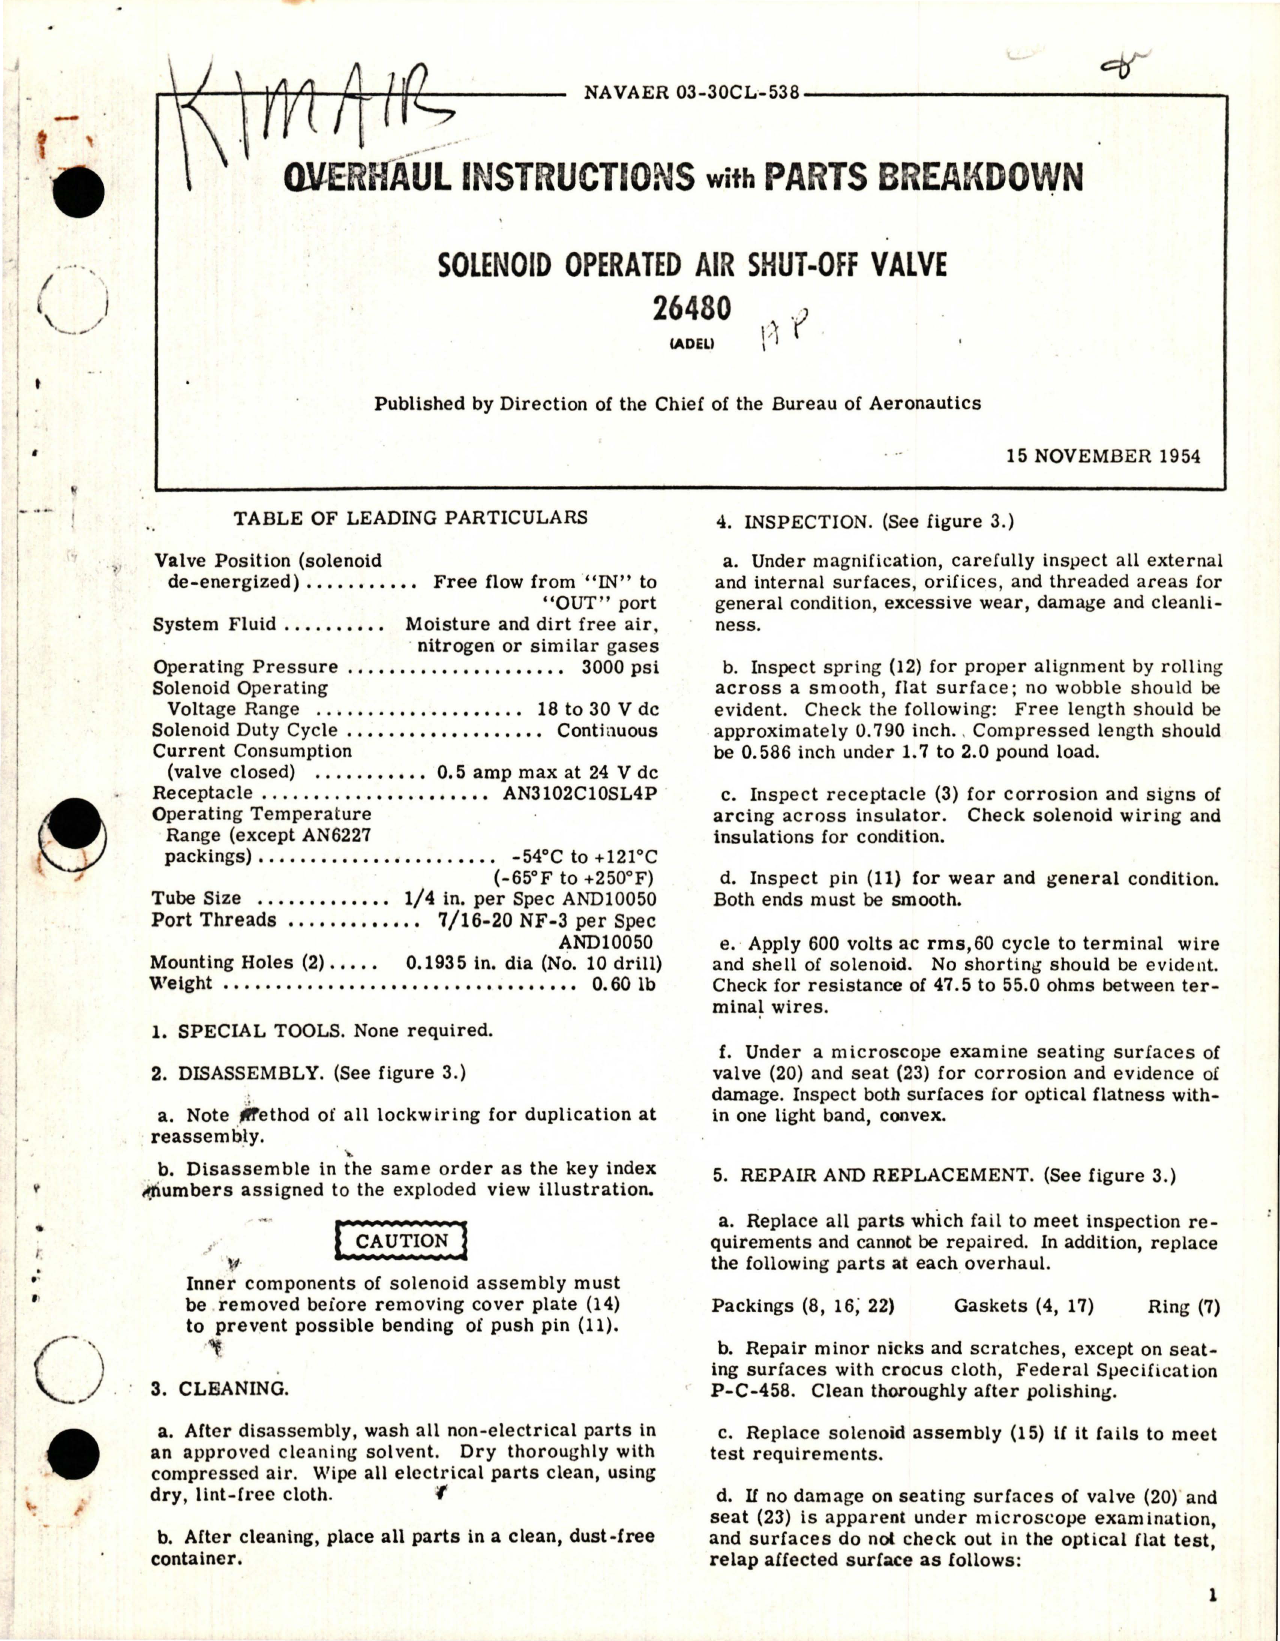 Sample page 1 from AirCorps Library document: Overhaul Instructions with Parts Breakdown for Solenoid Operated Air Shut-Off Valve - 26480